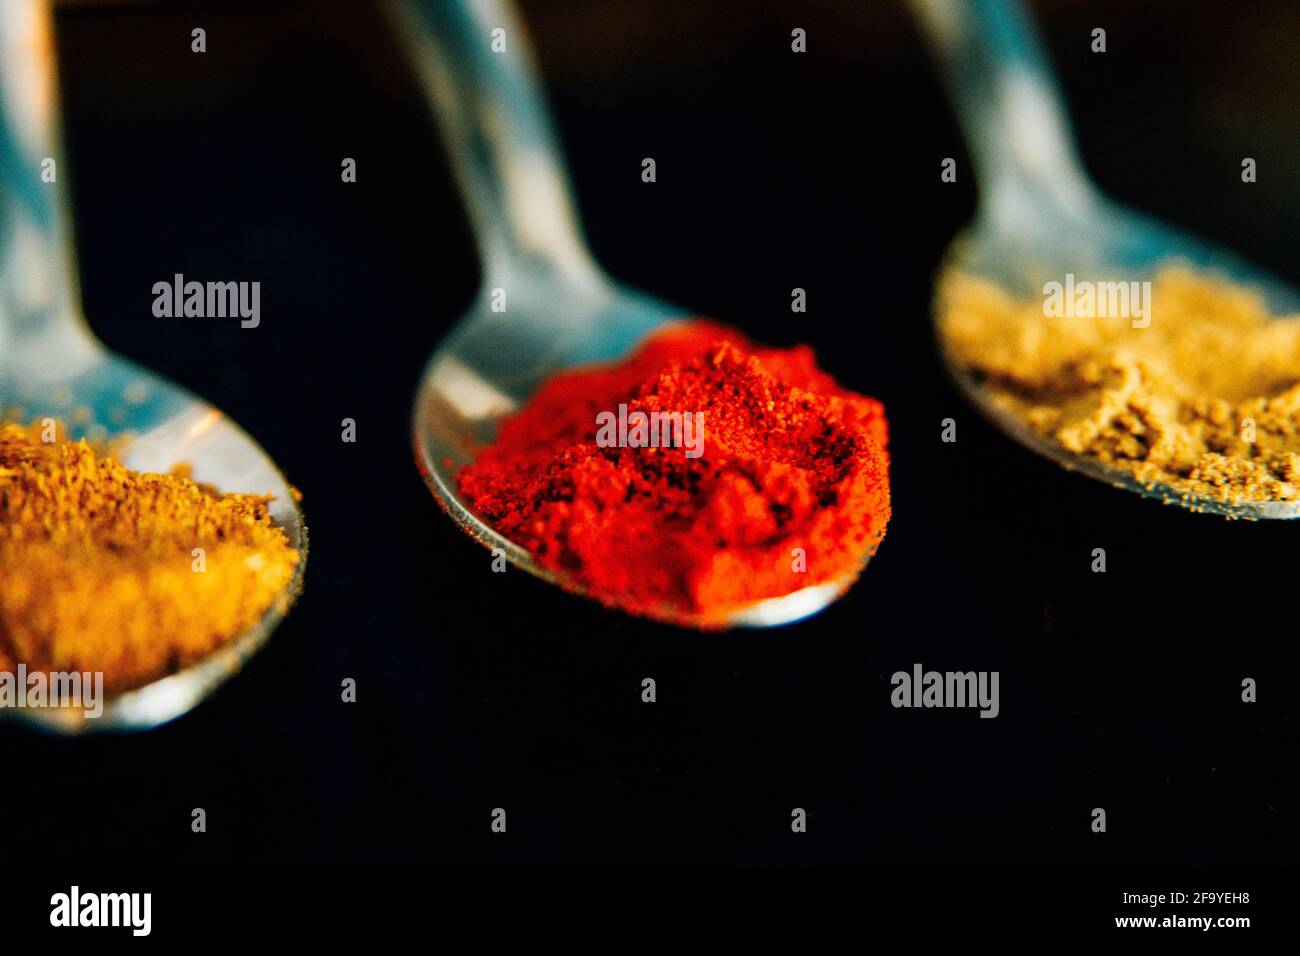 Colourful herbs and spices on silver spoons against a black background. Paprika, Cumin, Ginger. Ingredients for cooking spicy food. Stock Photo